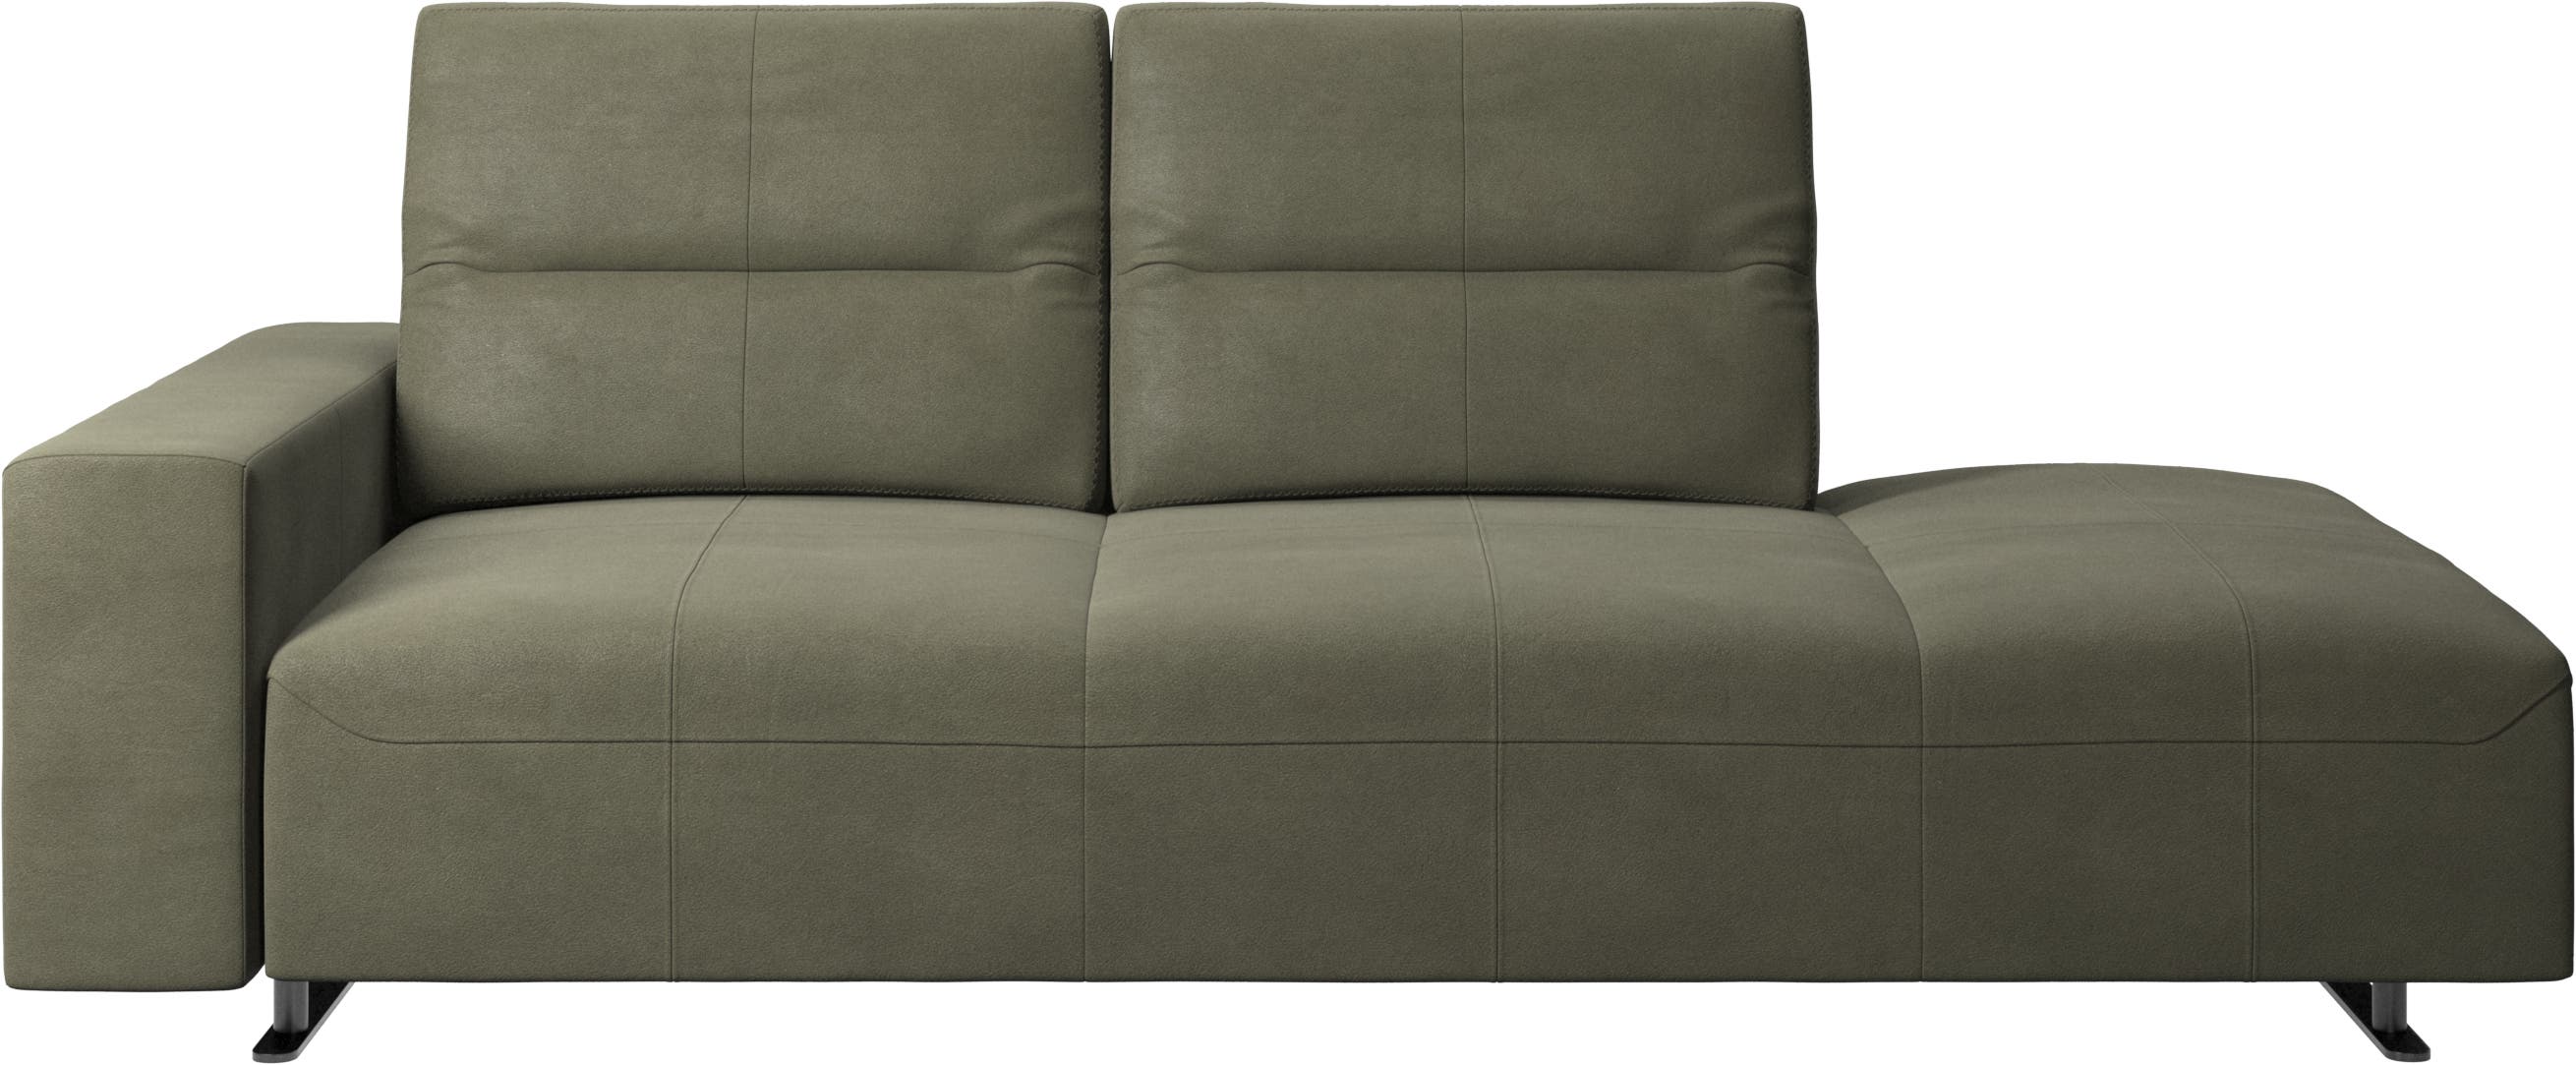 Hampton sofa with adjustable back and lounging unit right side, storage and armrest left side